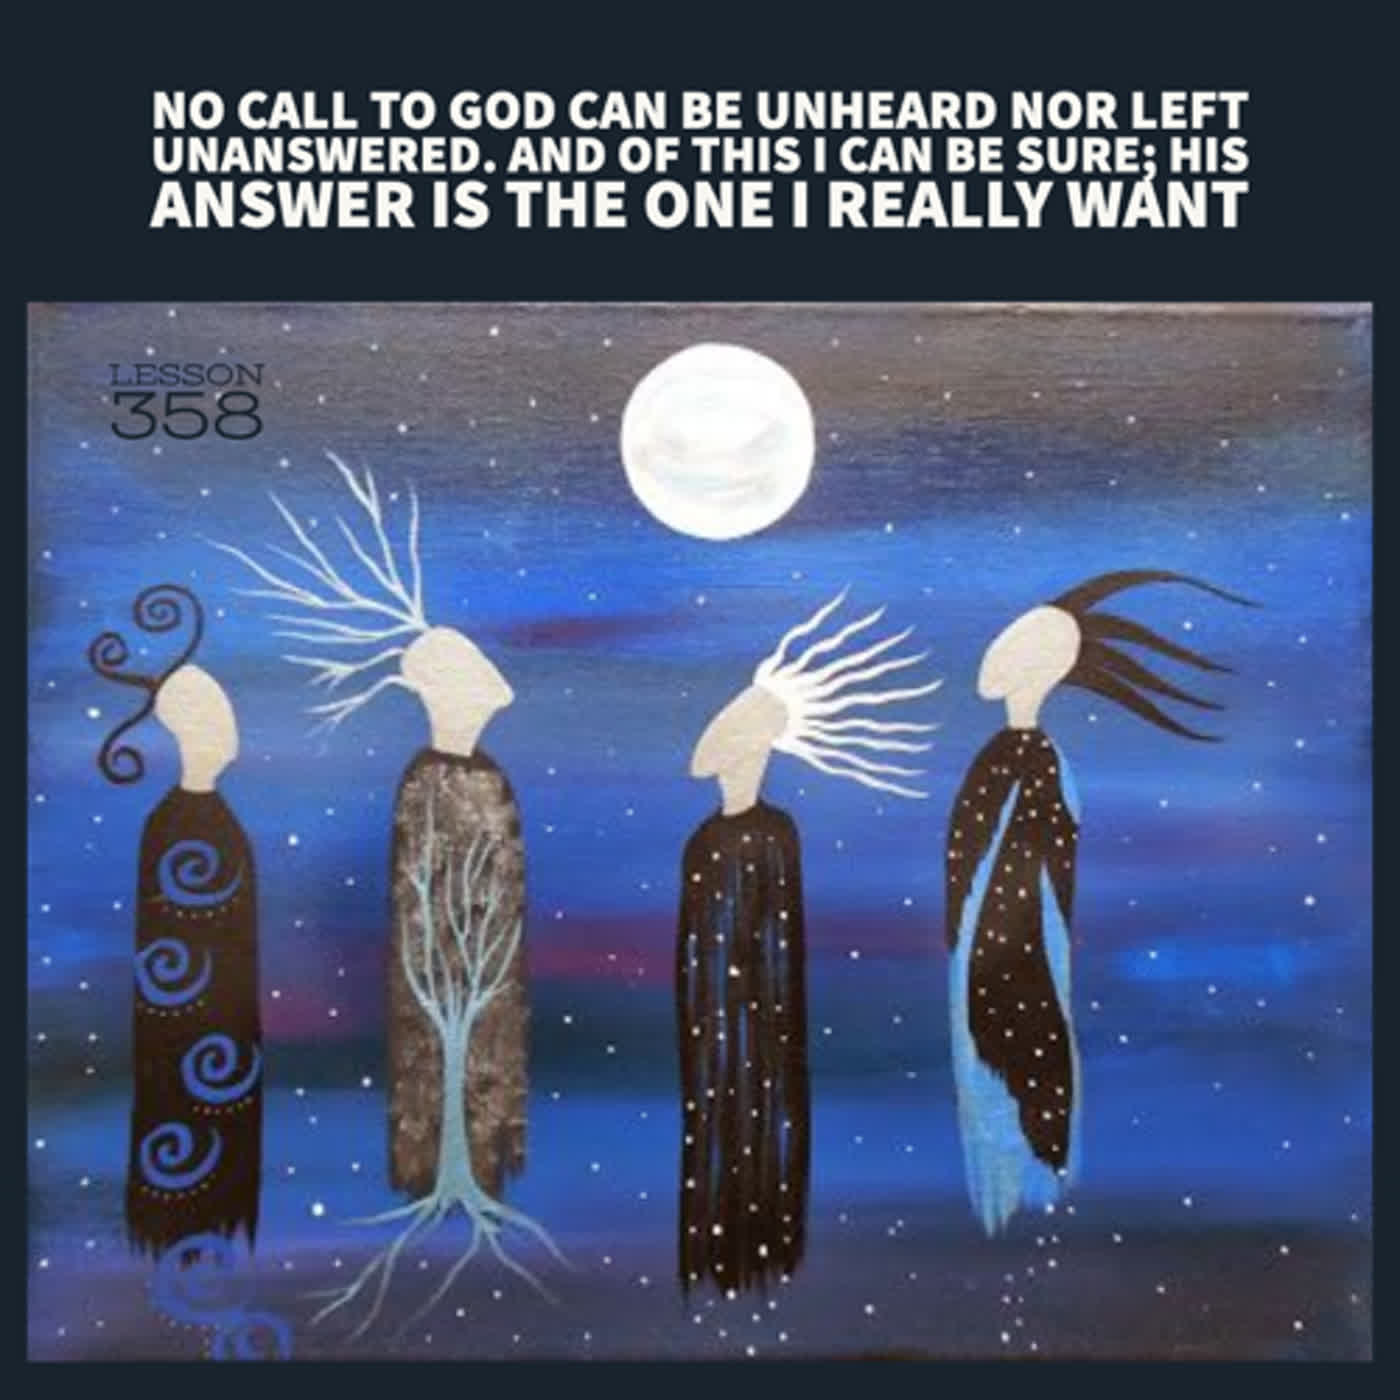 Lesson 358  No call to God can be unheard nor left unanswered. And of this I can be sure; His answer is the one I really want